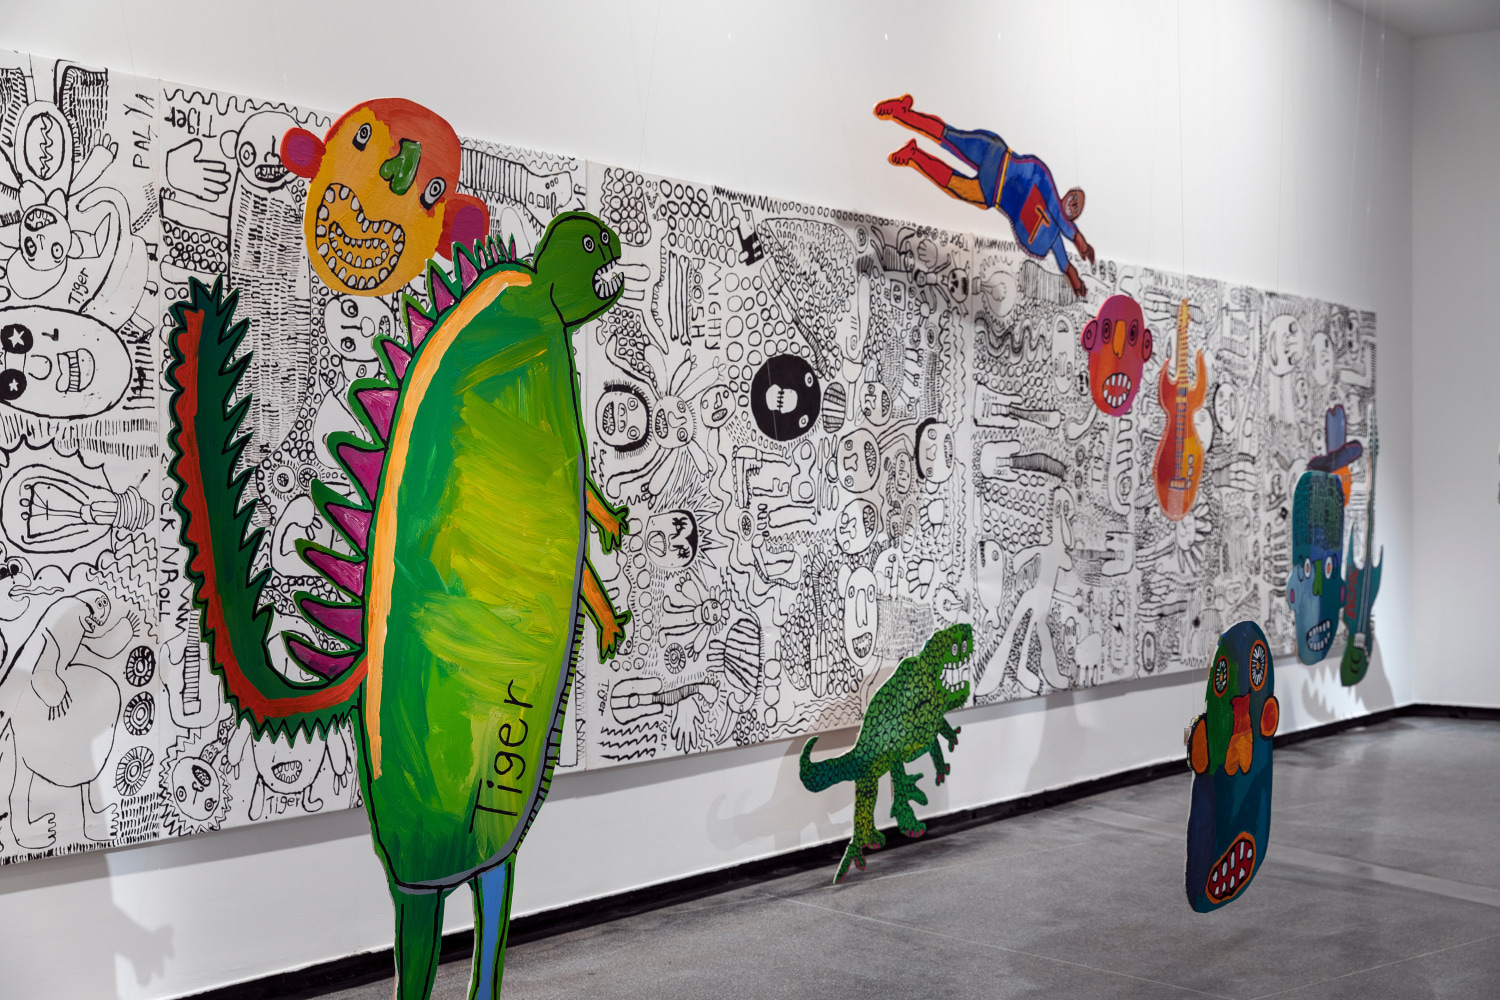 Tiger Yaltangki

TIGERLAND&amp;nbsp;2018

synthetic polymer paint on linen and plywood cut-outs

installation: 200.0 x 1200.0 x 240.0 cm

Installation view, Australian Centre for Contemporary Art,&amp;nbsp;Melbourne, 2018

Courtesy the artist and Iwantja Arts,&amp;nbsp;Indulkana and Alcaston Gallery,&amp;nbsp;Melbourne